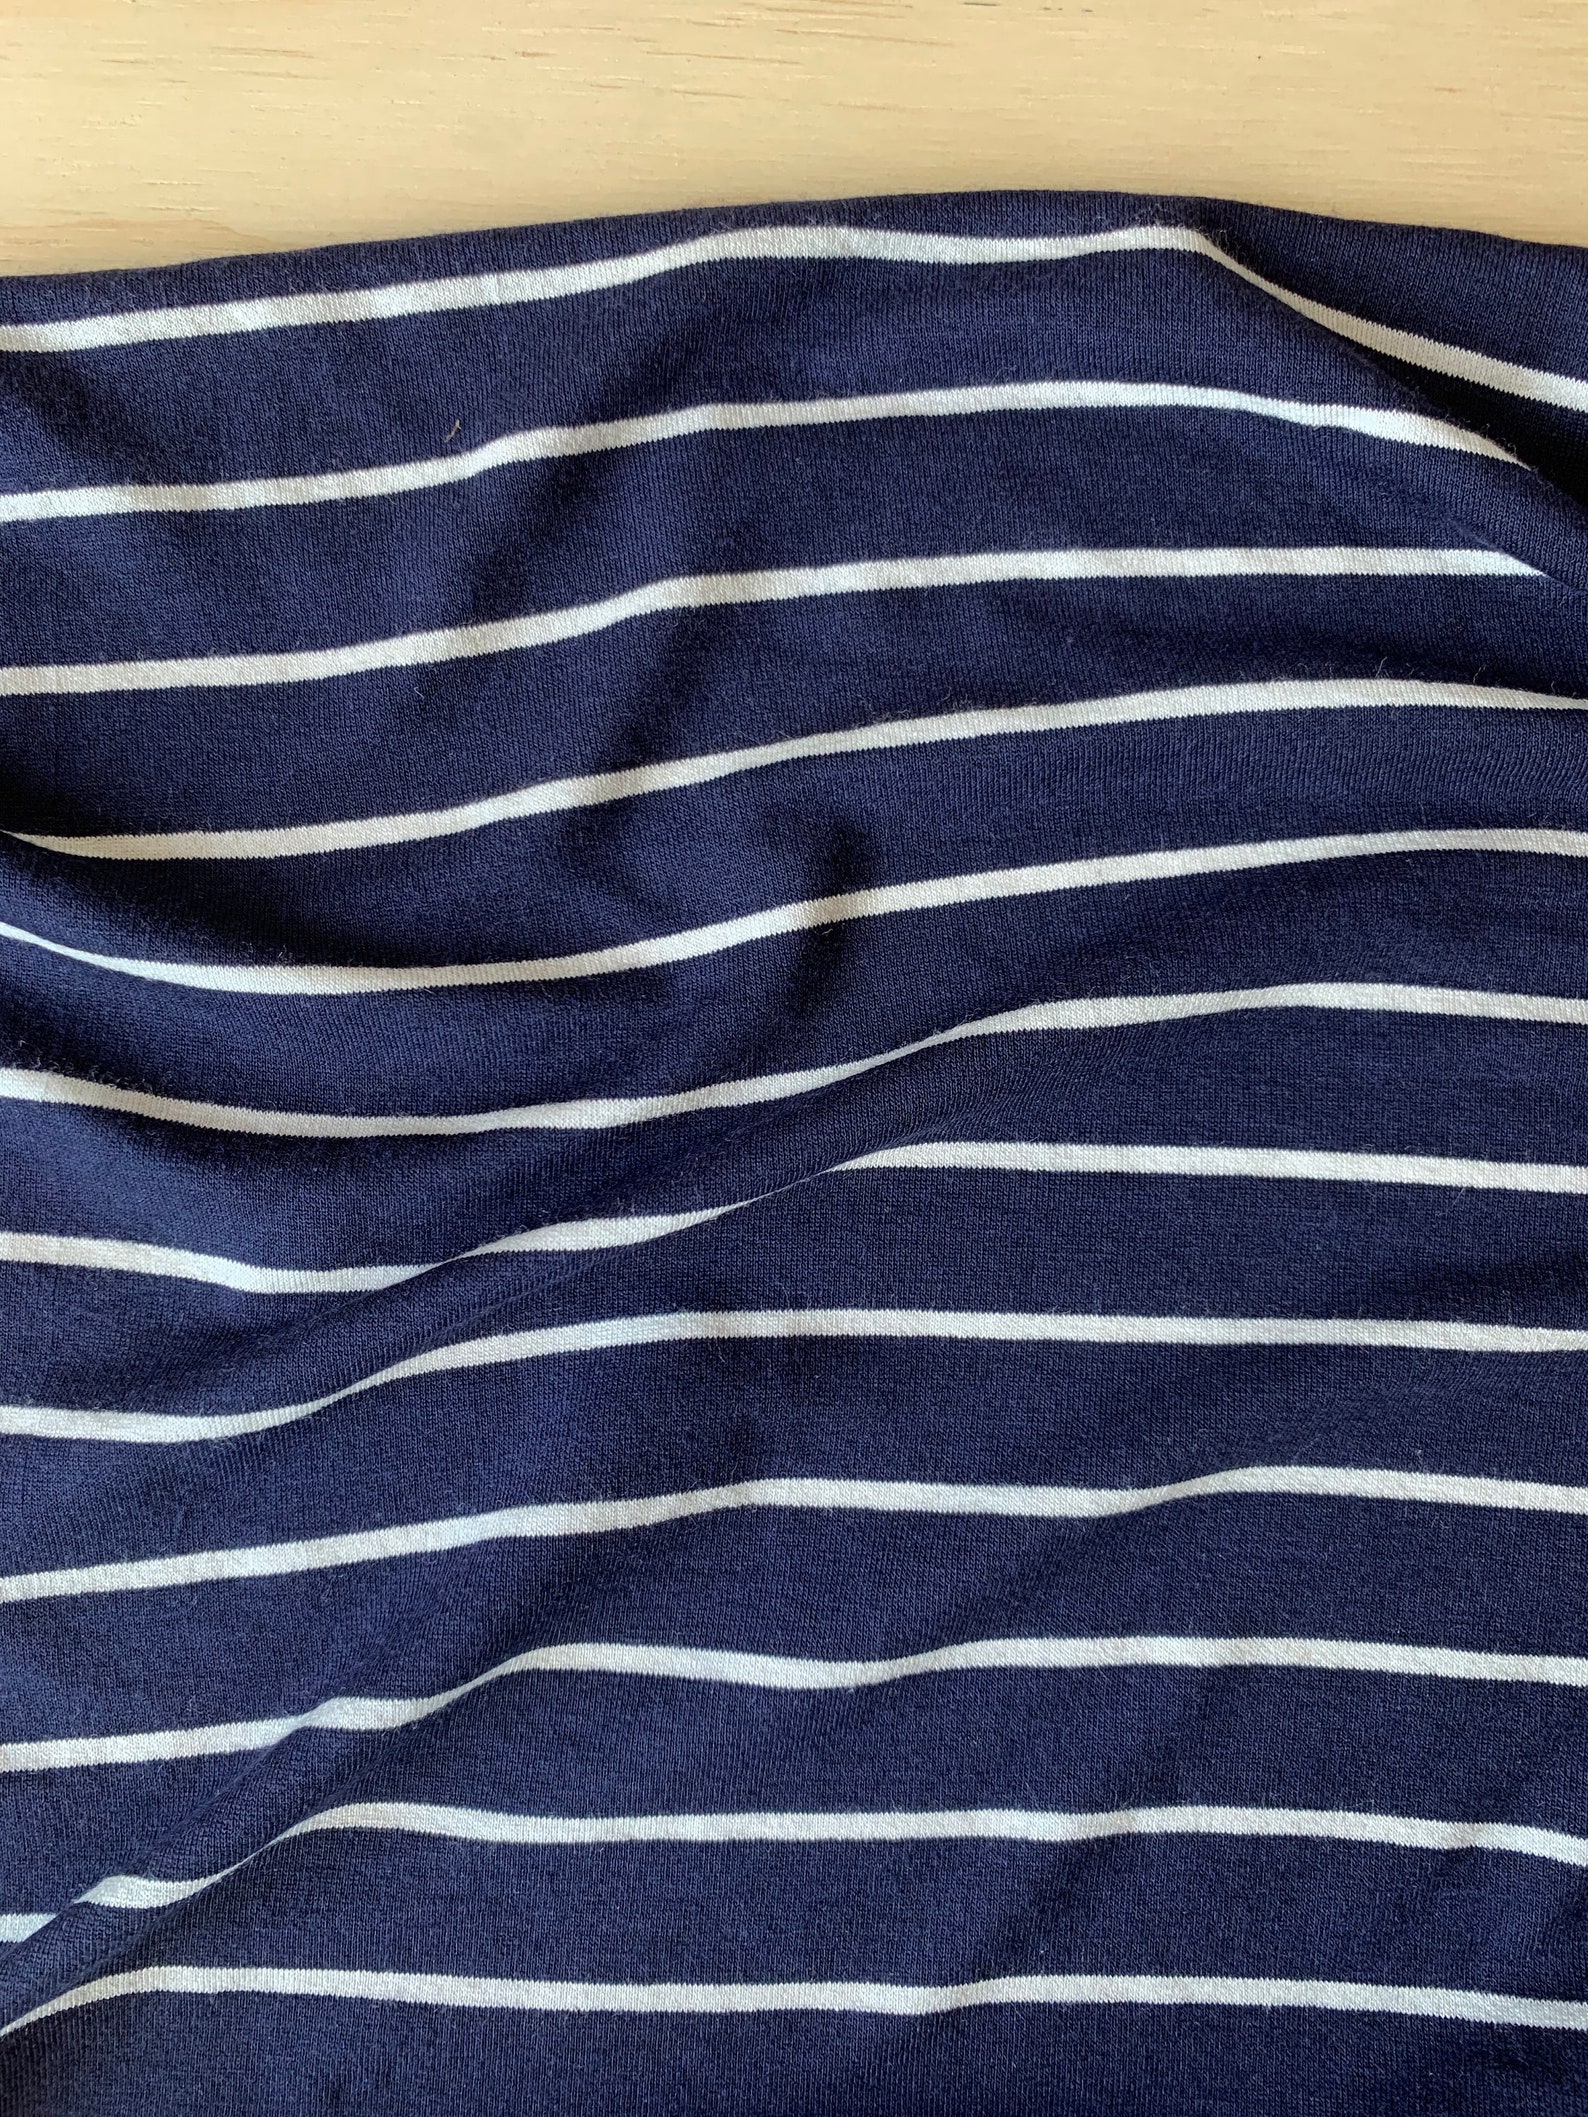 Navy and White Stripe Stretch Spandex Jersey T Shirt Fabric 1 | Etsy